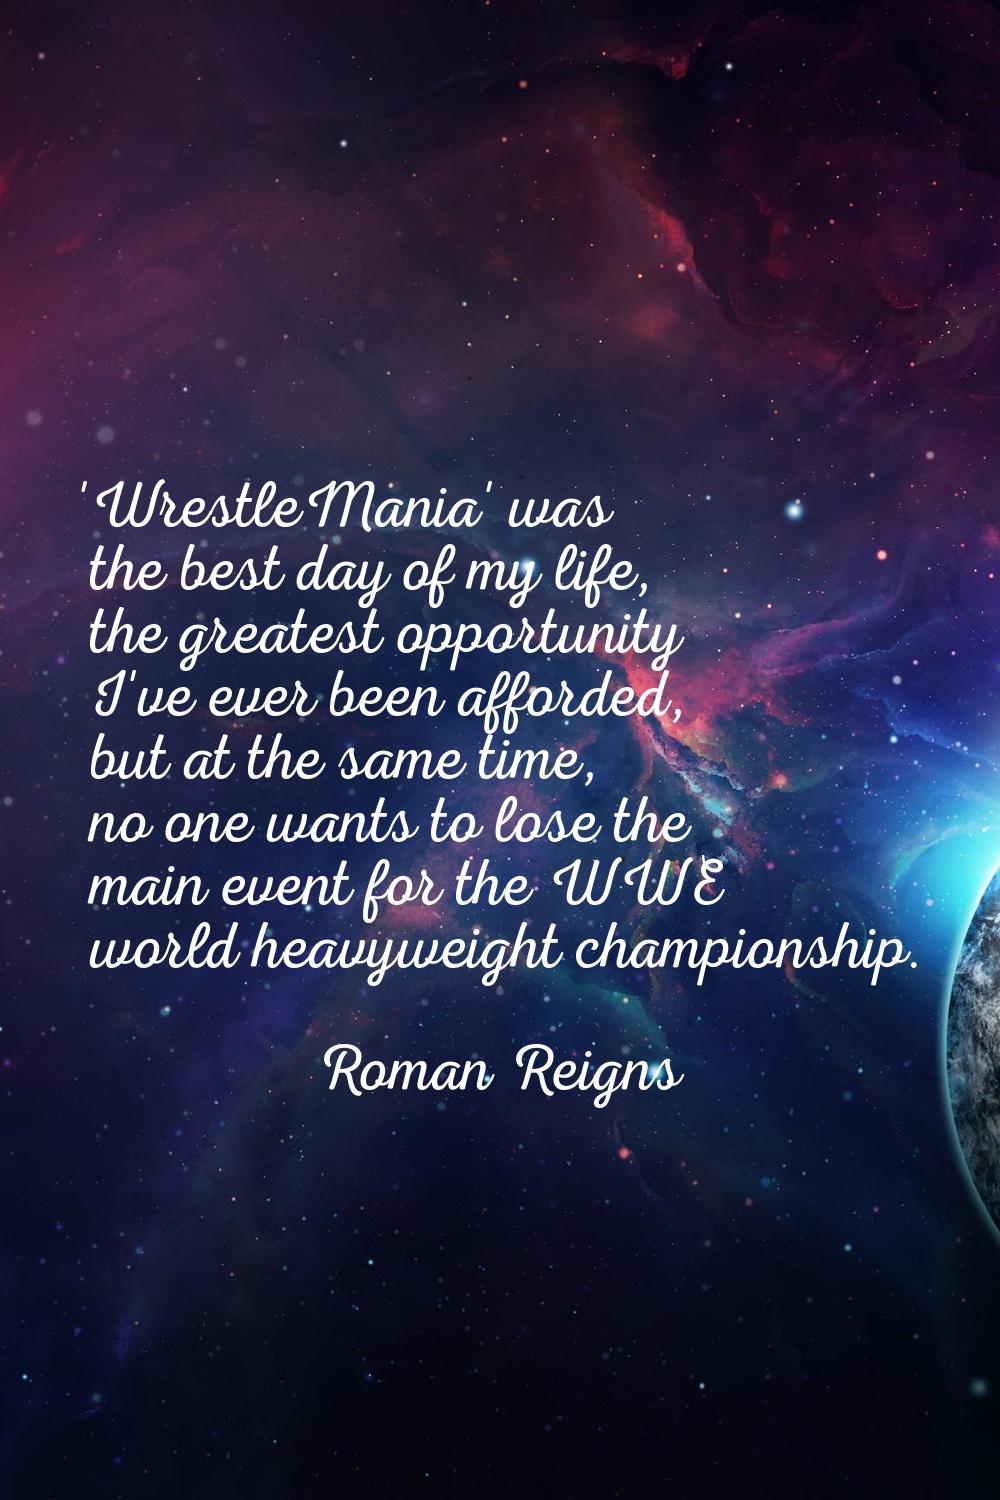 'WrestleMania' was the best day of my life, the greatest opportunity I've ever been afforded, but a